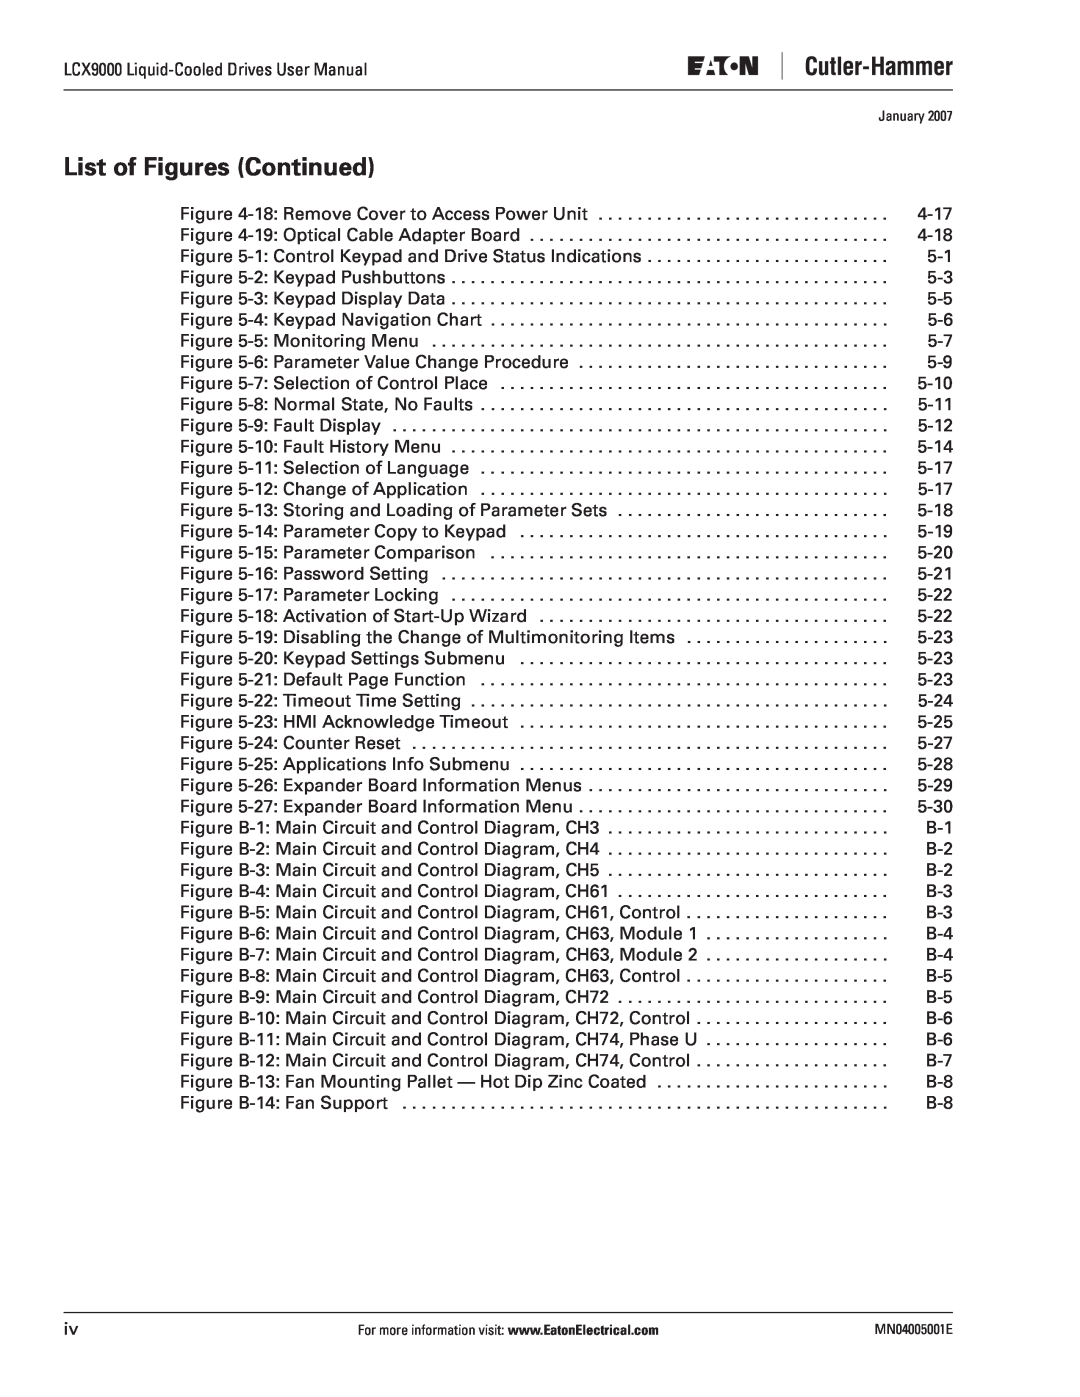 J. T. Eaton LCX9000 user manual List of Figures Continued 